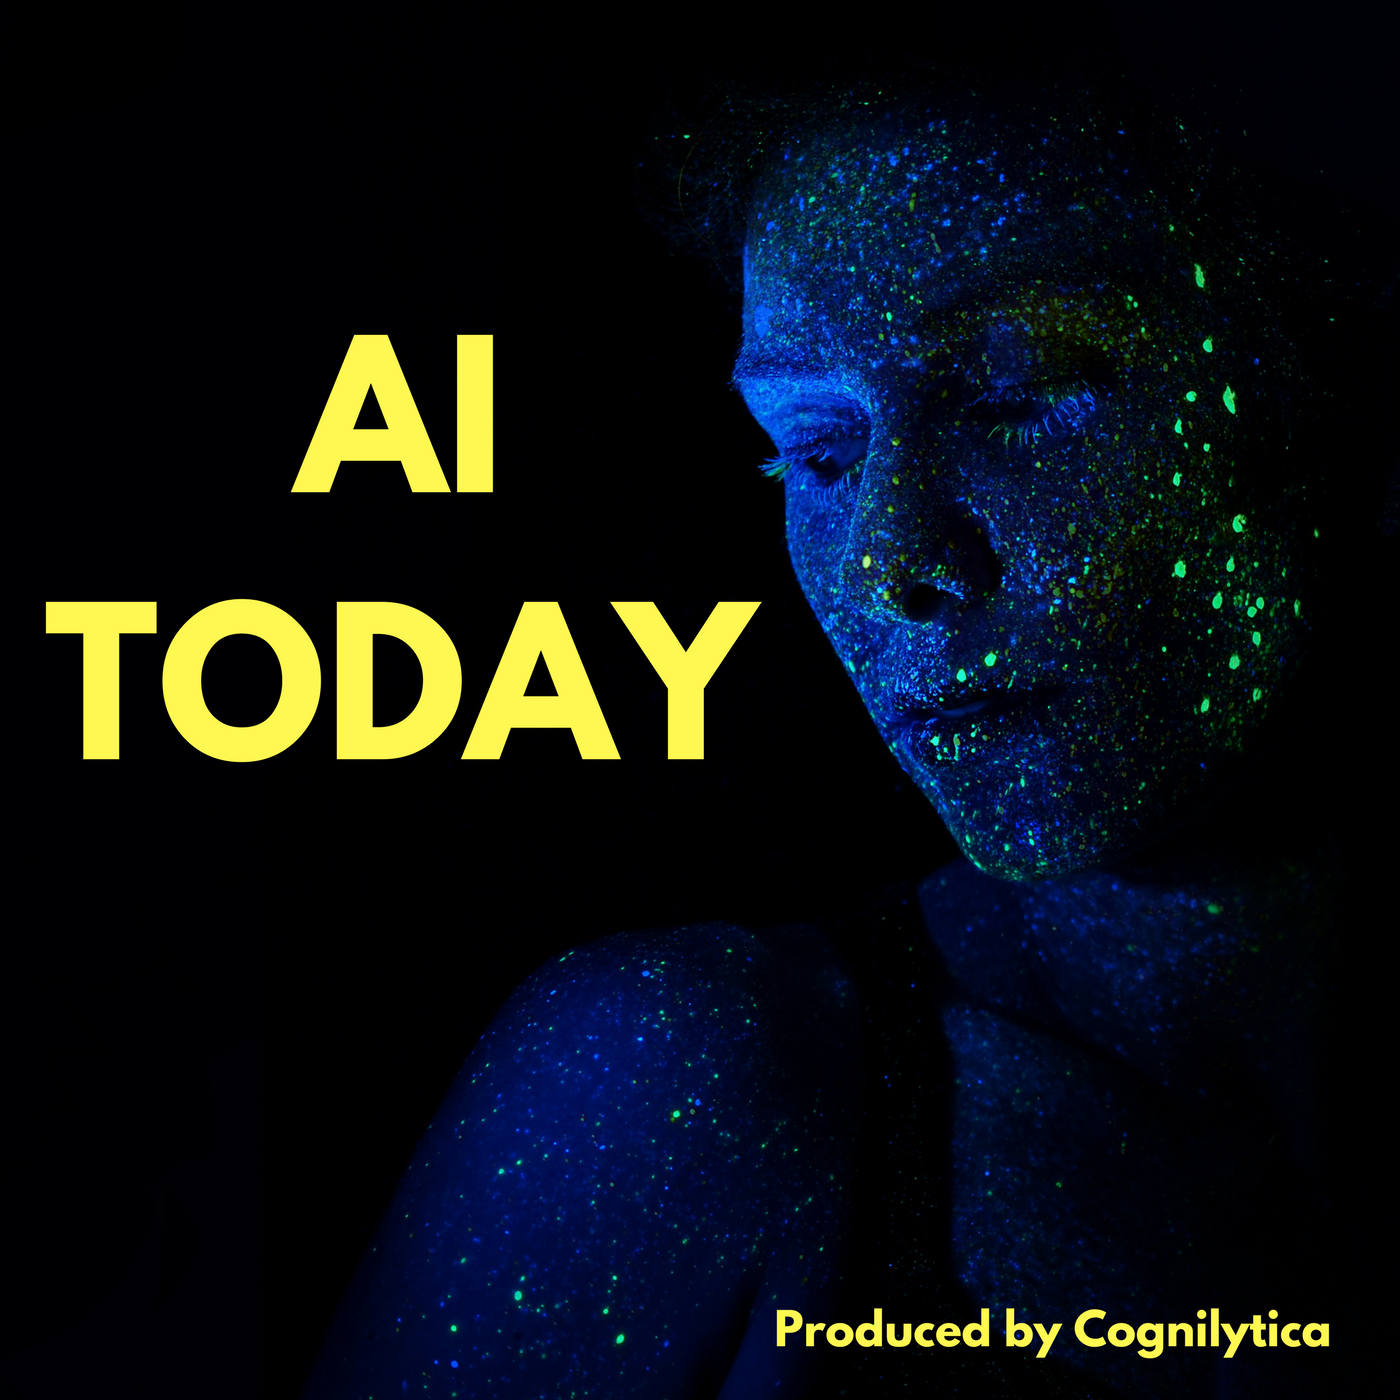 A highlight from AI Today Podcast: Data Science through a Human Lens  Interview with Felipe Flores, host of Data Futurology Podcast